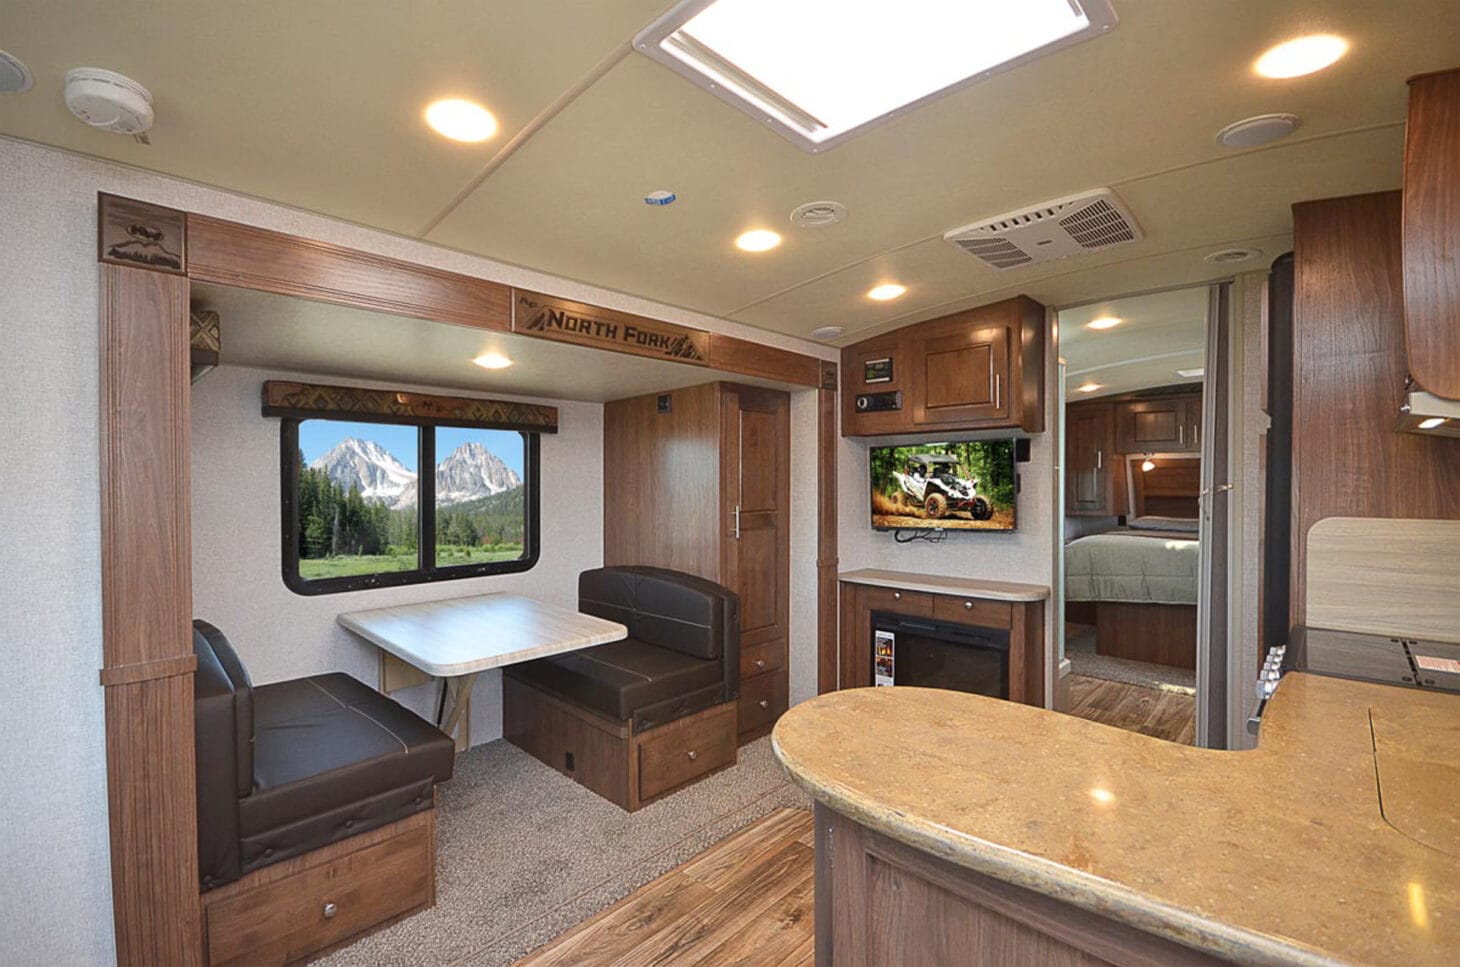 Interior of an RV, with a dinette, kitchen, and bedroom in the back